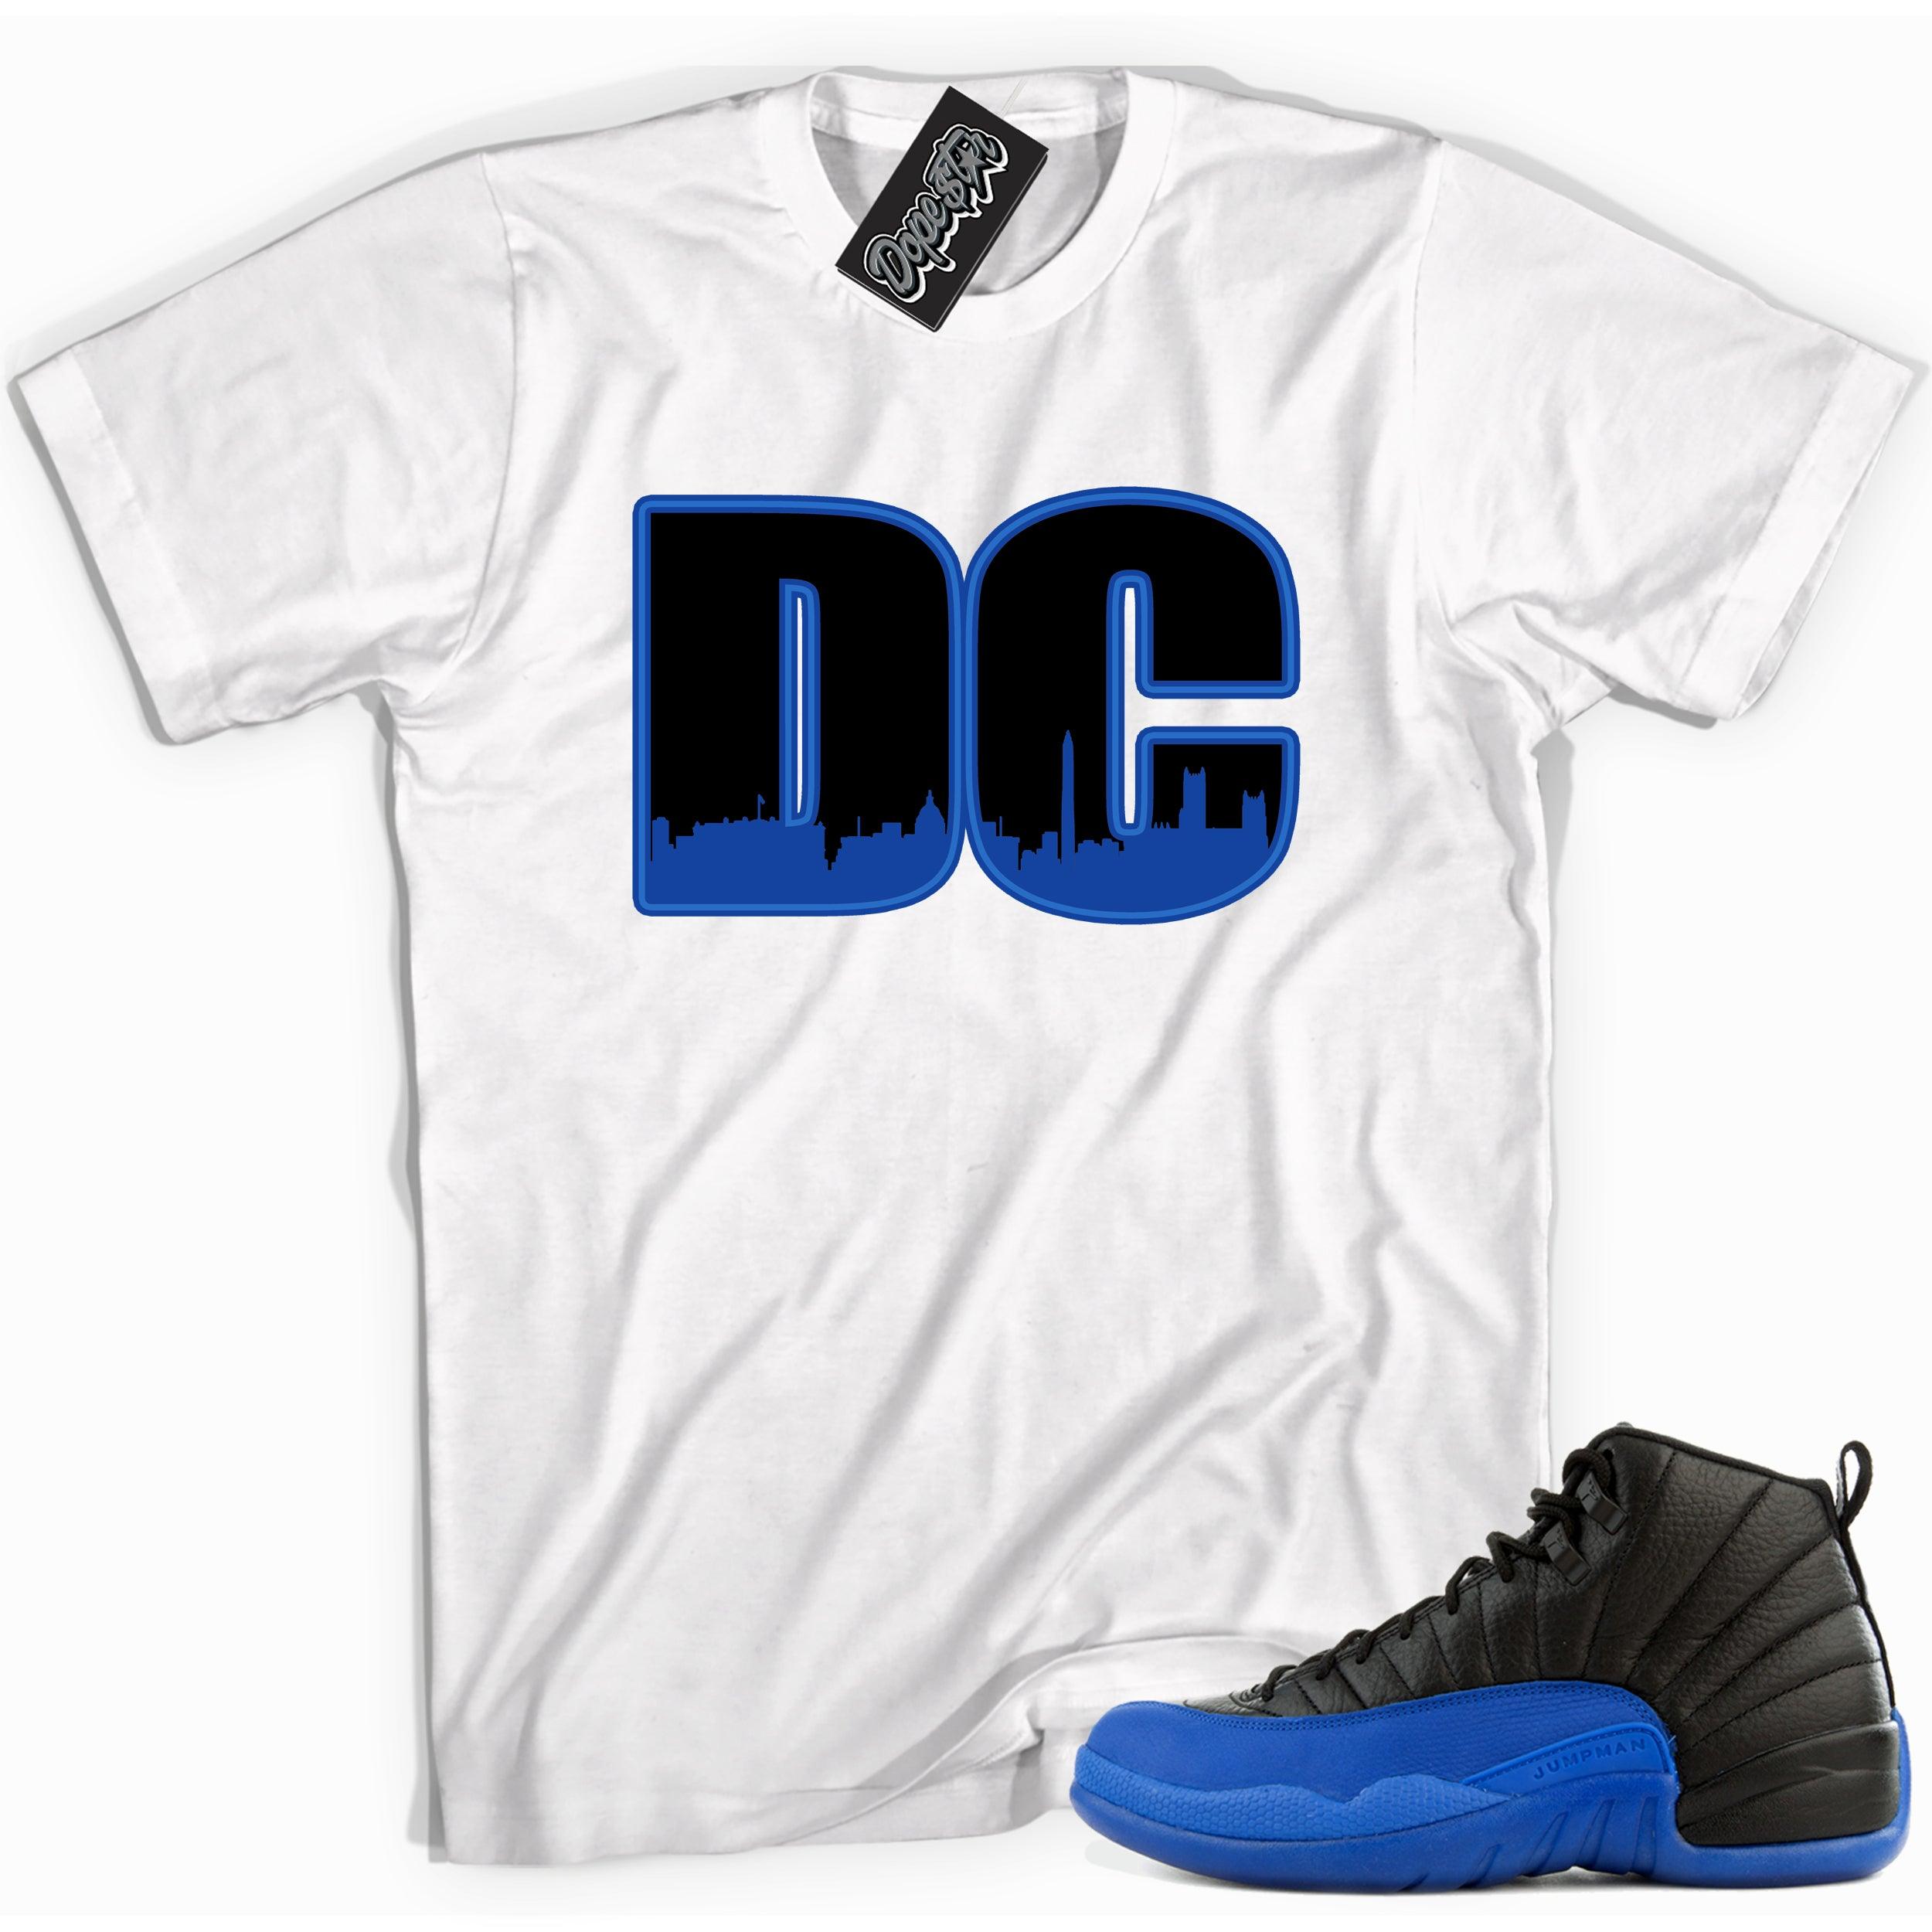 Cool white graphic tee with 'dc' print, that perfectly matches Air Jordan 12 Retro Black Game Royal sneakers.